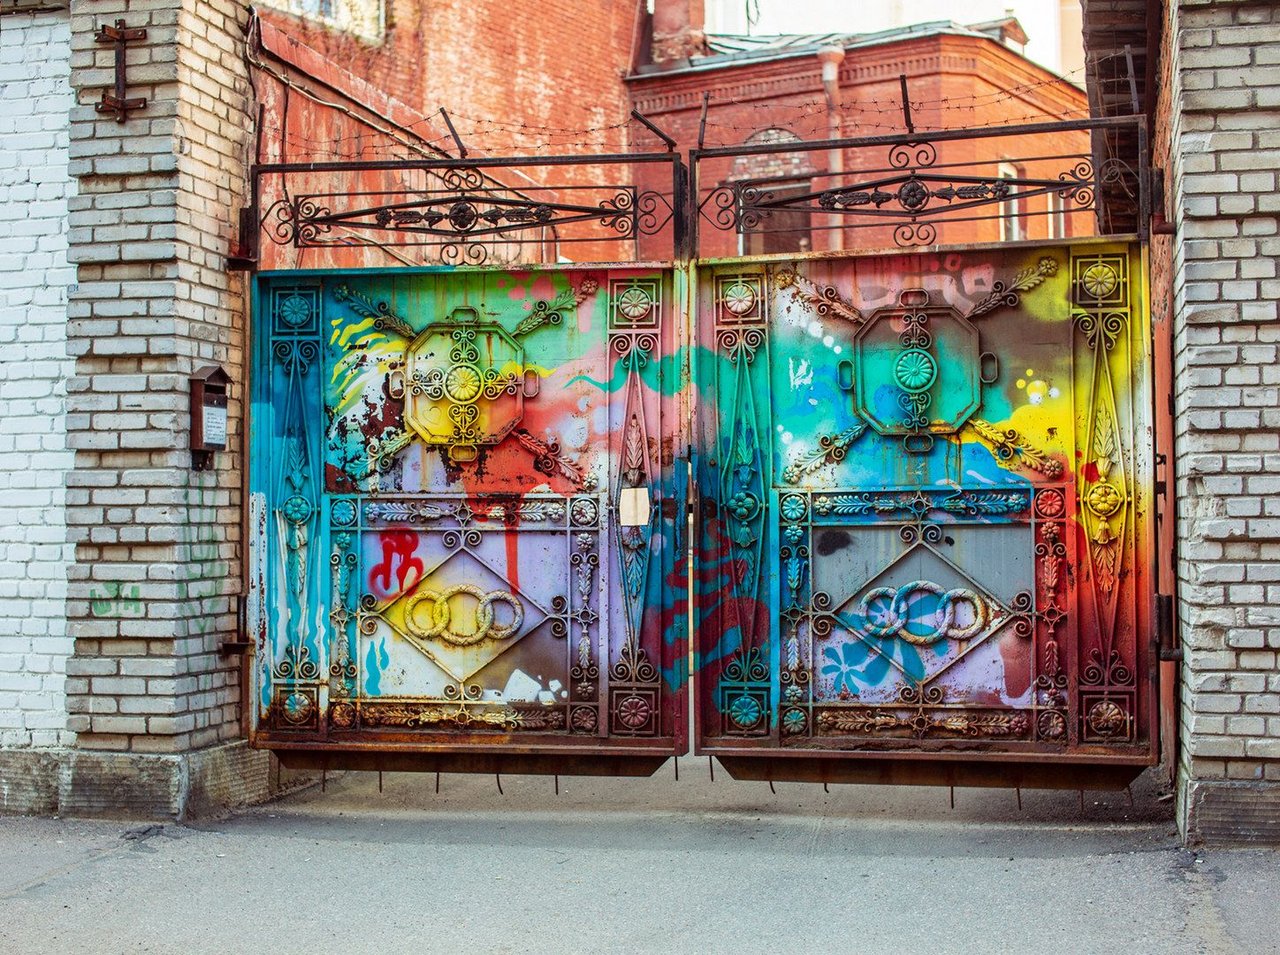 Hunting for street art at St.Petersburg: Miyazaki's garden, Fuck War, Coffee Duck and other finds